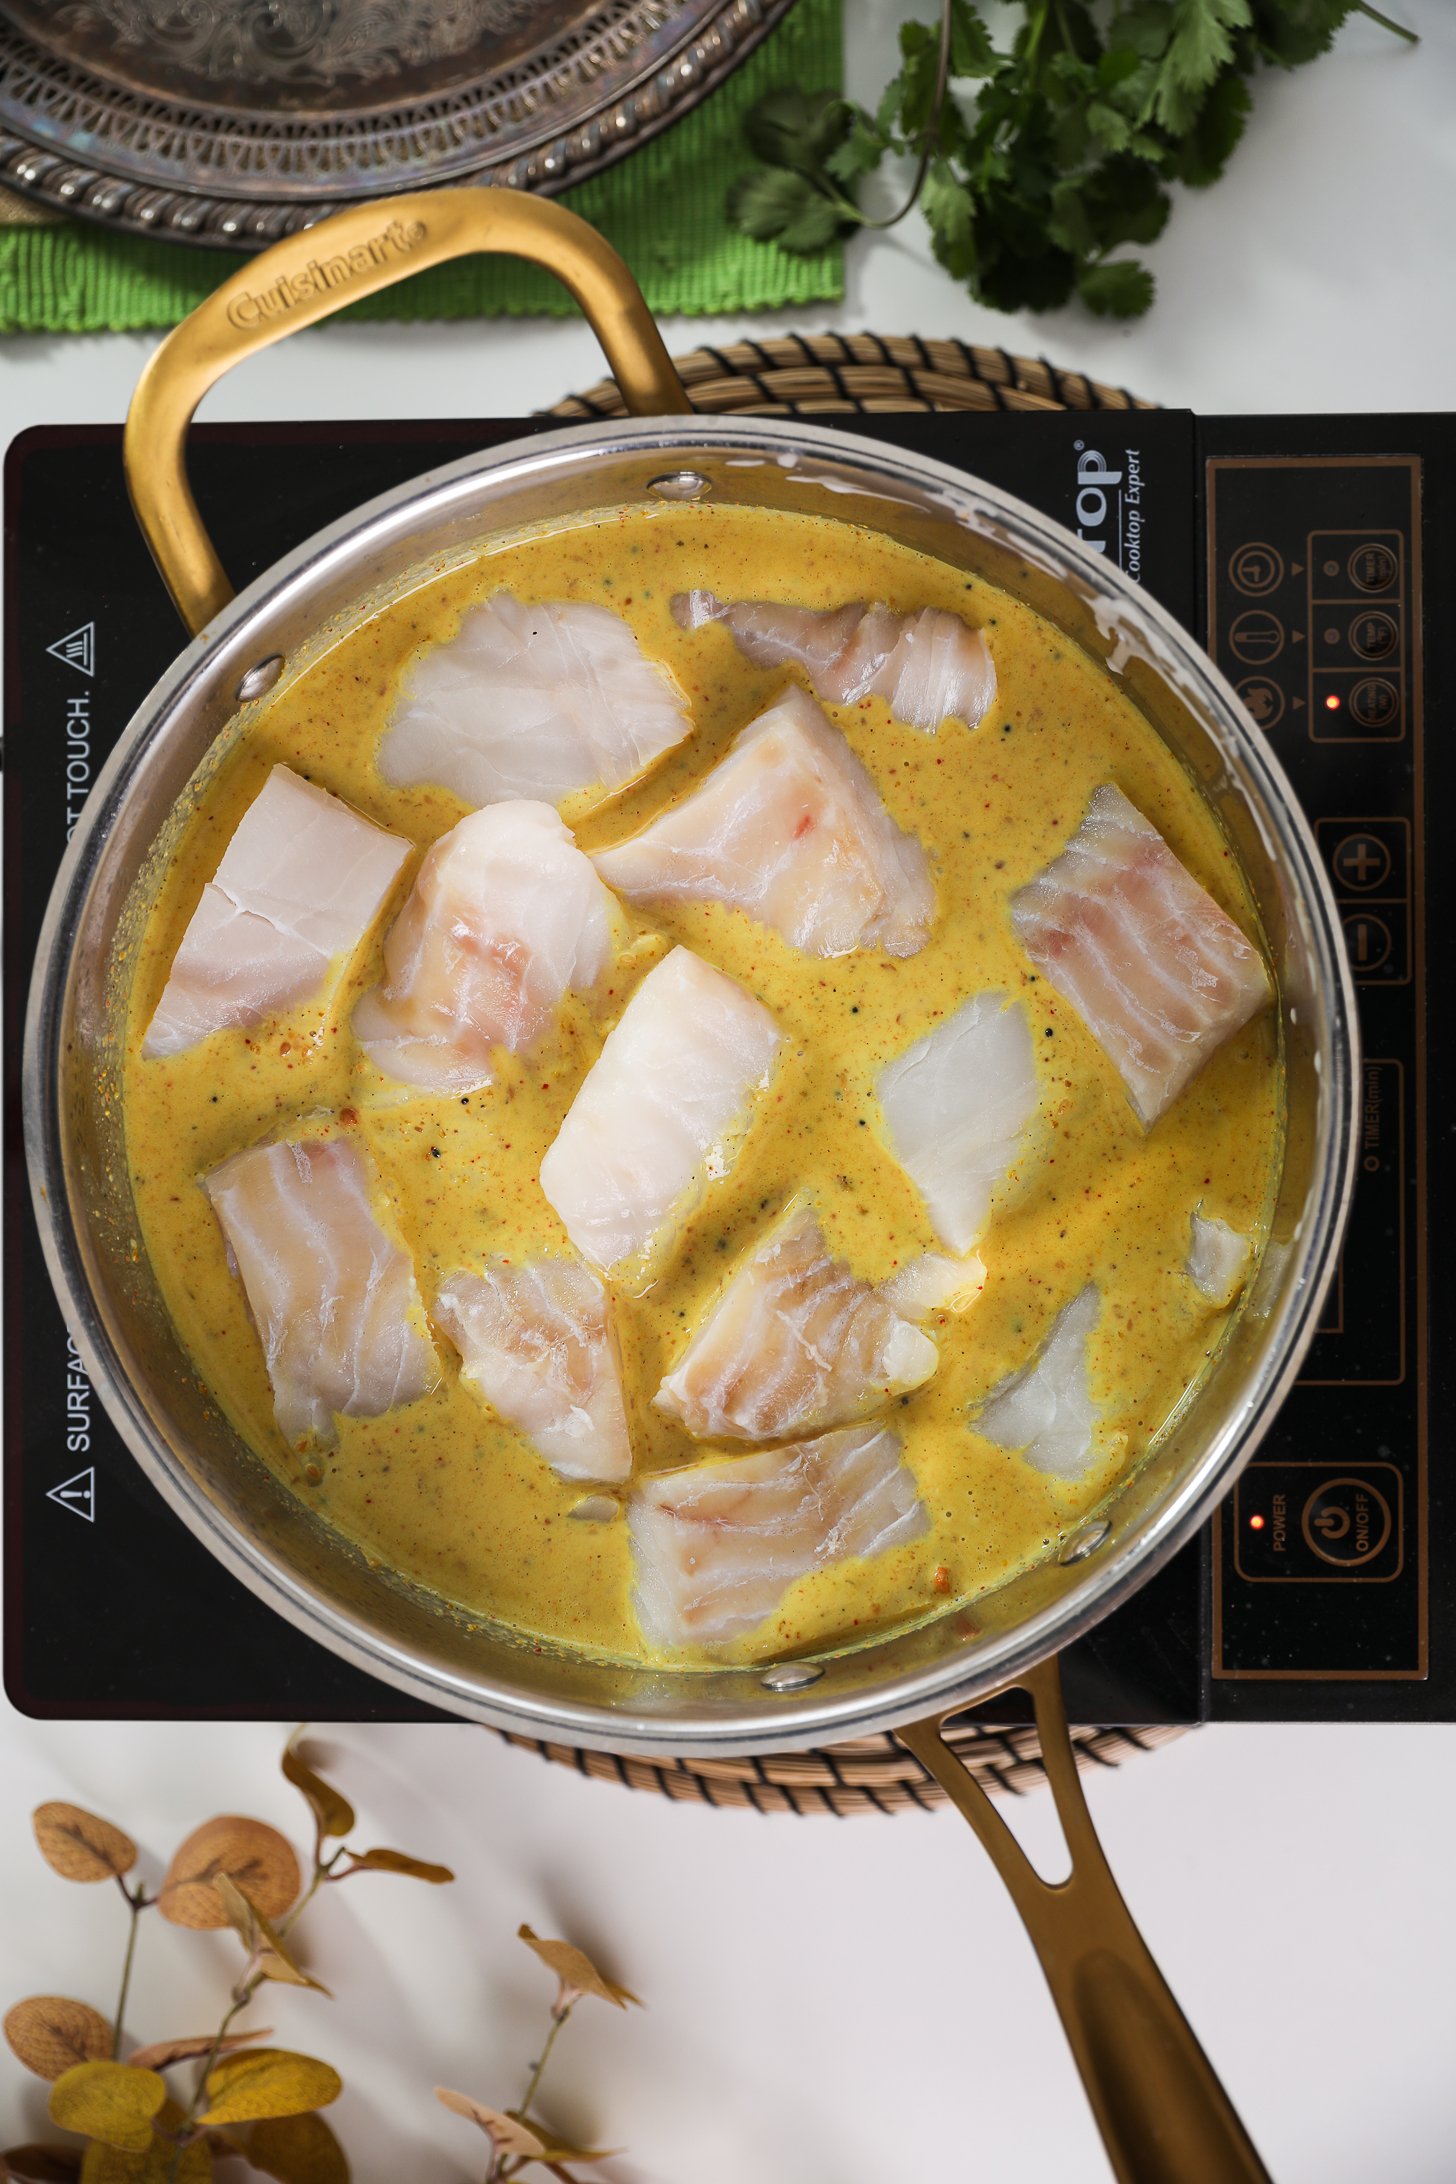 Mobile cooktop showcasing a pan of fish fillets placed in a curry sauce.